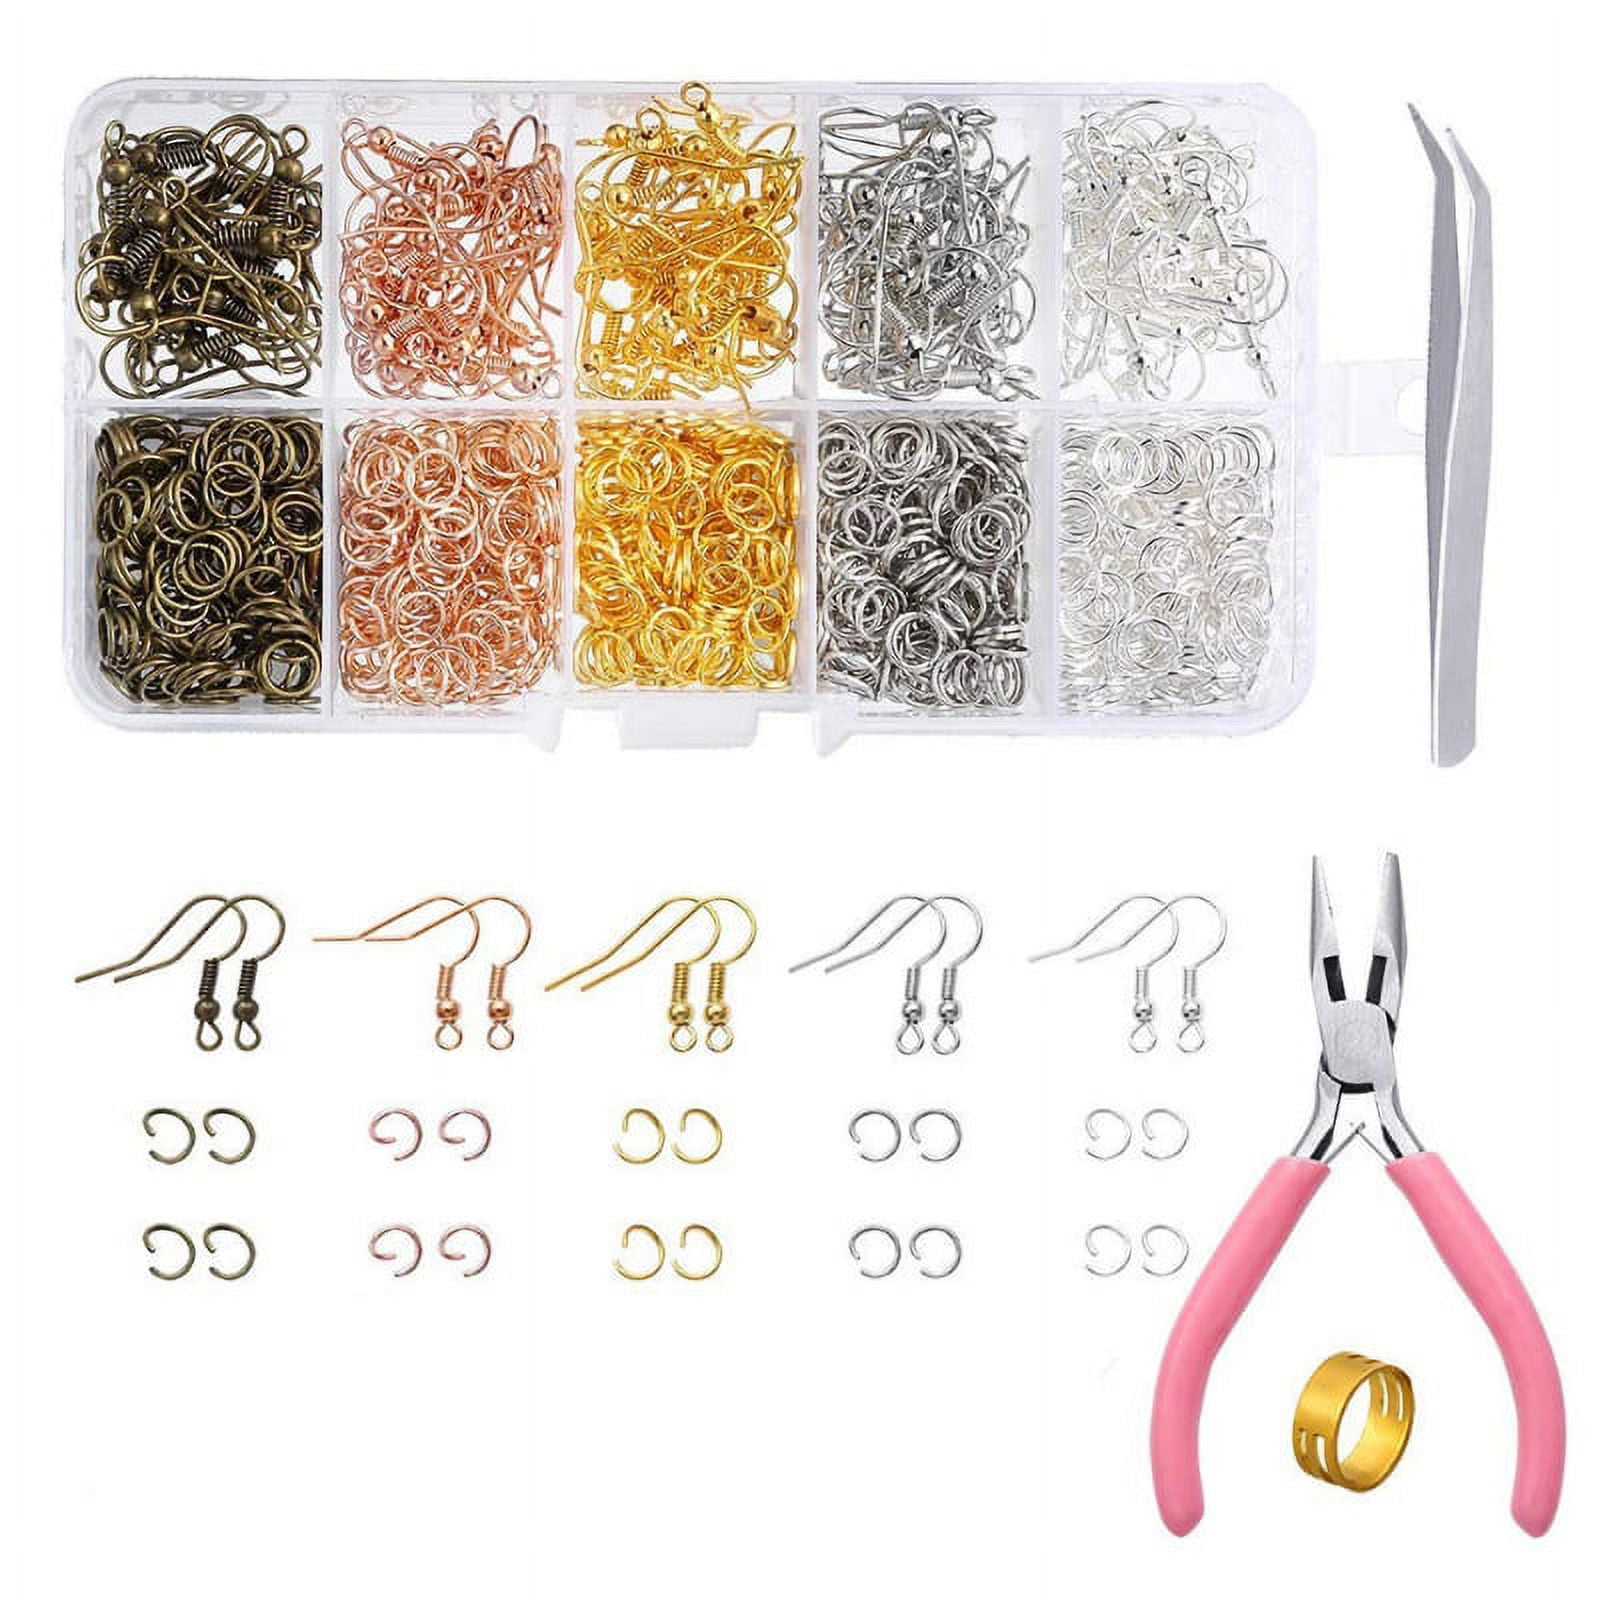 925 Sterling Silver Earring Hooks 150 PCS/75 Pairs,Ear Wires Fish  Hooks,500pcs Hypoallergenic Earring Making kit with Jump Rings and Clear  Silicone Earring Backs Stoppers (Silver) 